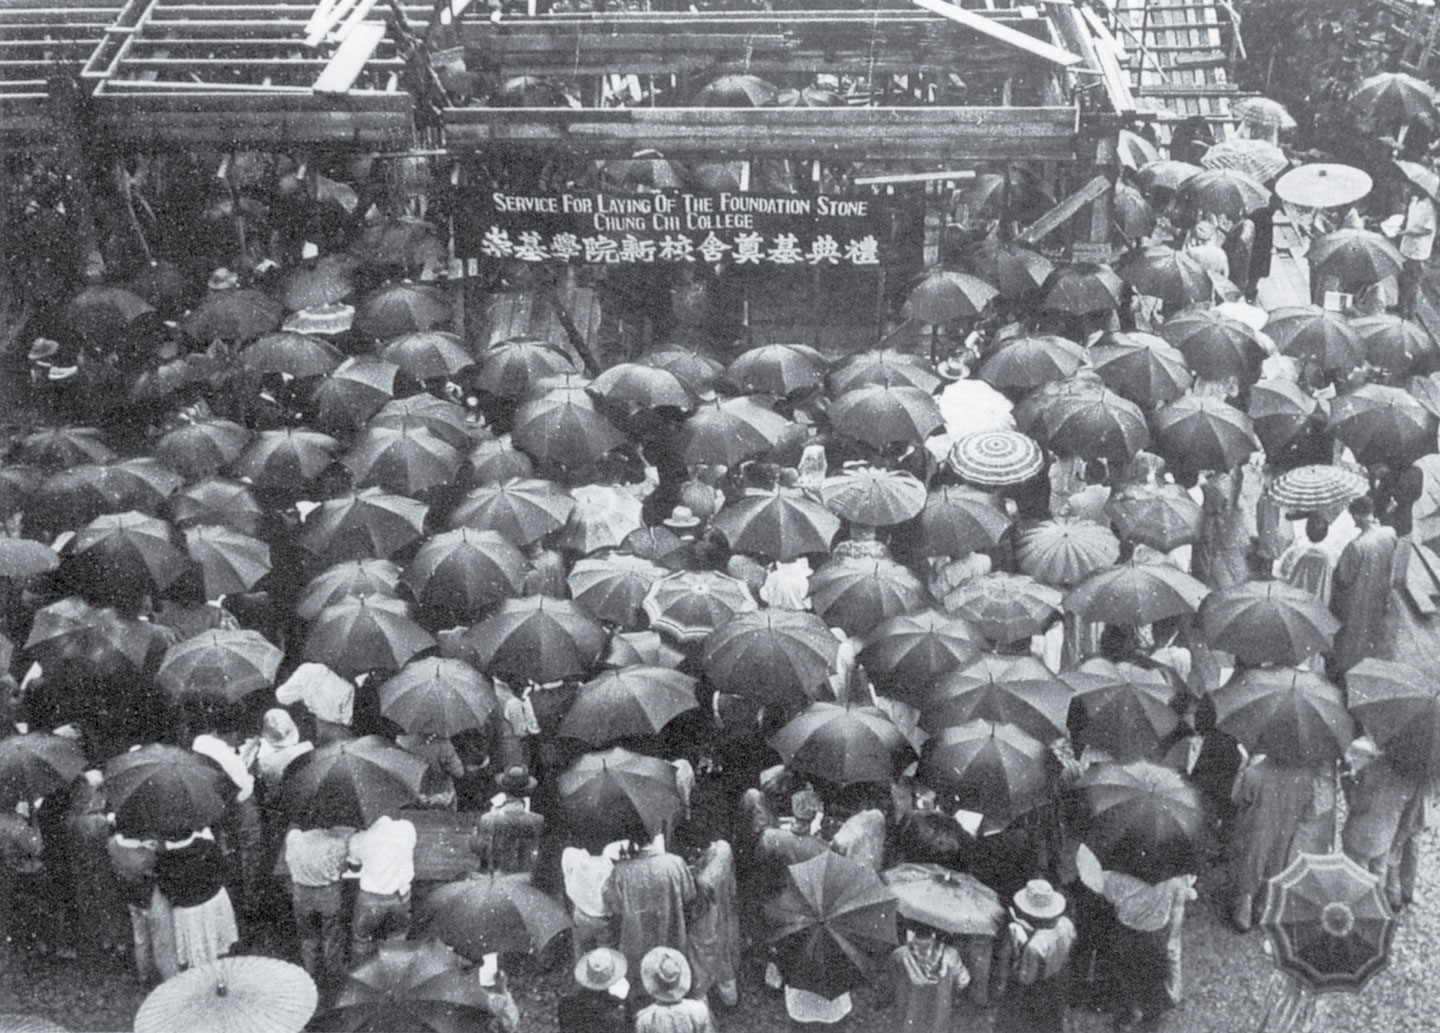 Foundation ceremony of the new campus of Chung Chi College (1956)